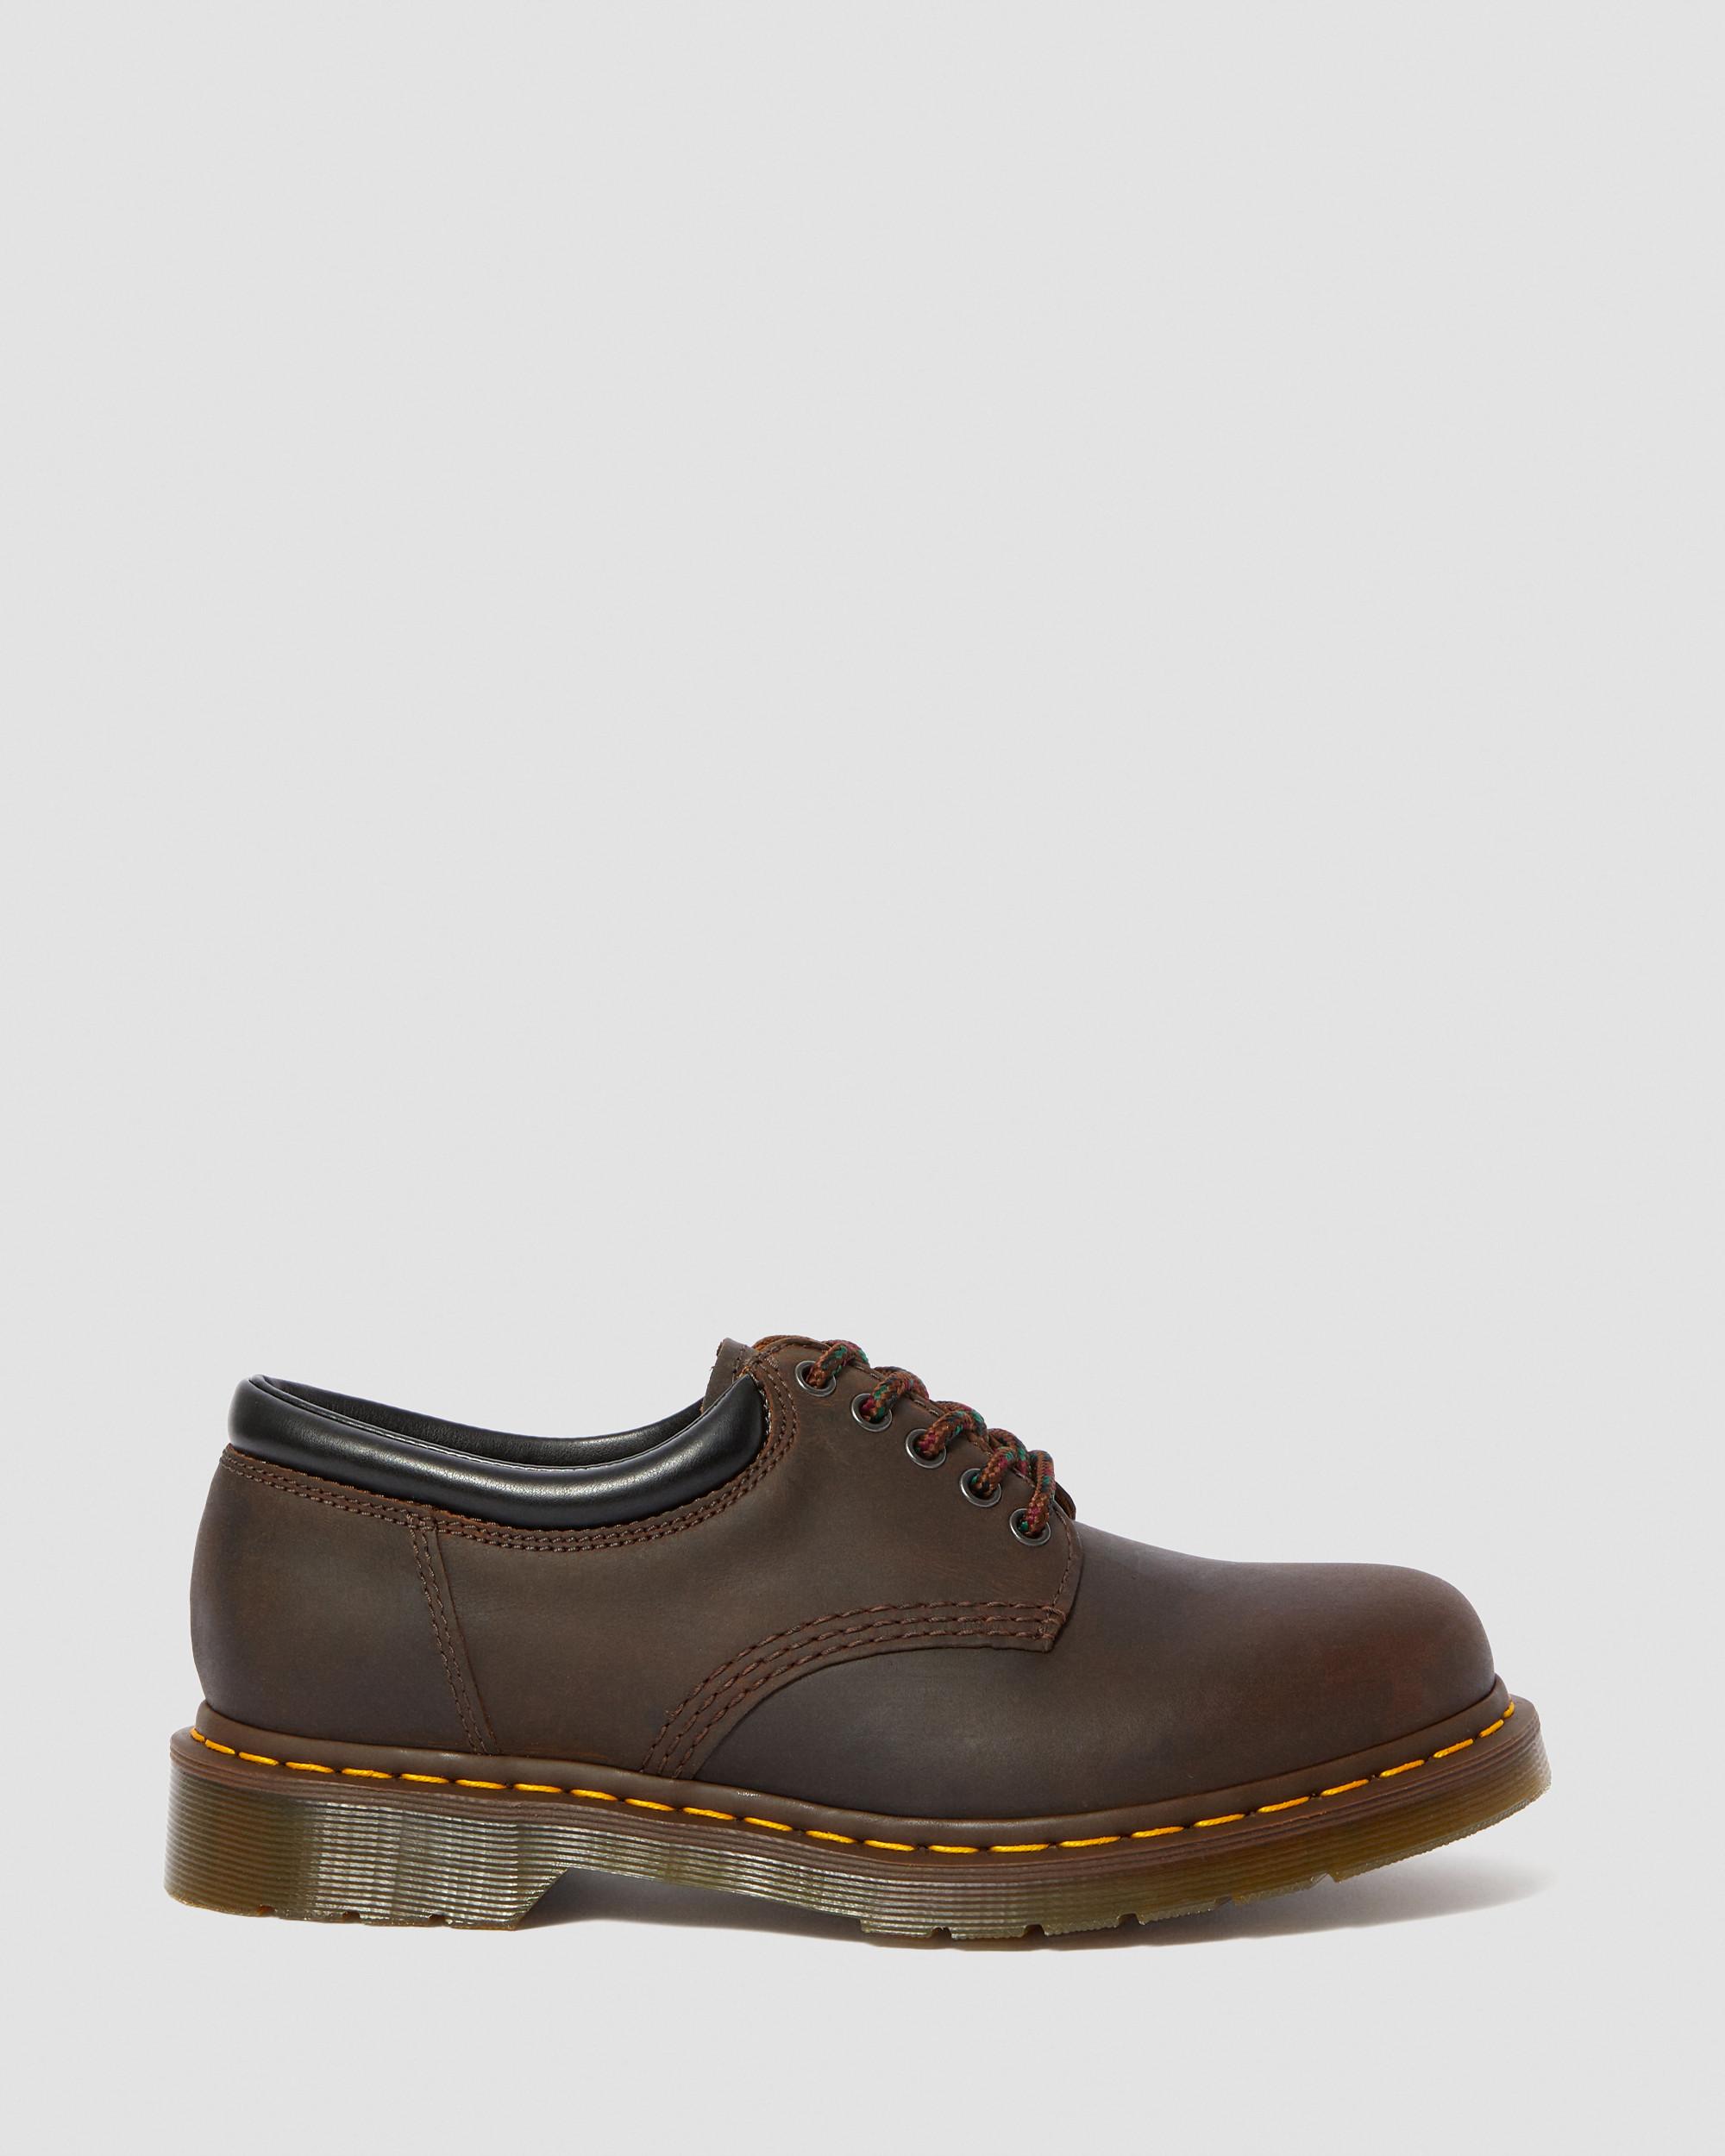 8053 Crazy Horse Leather Casual Shoes, Dark Brown | Dr. Martens